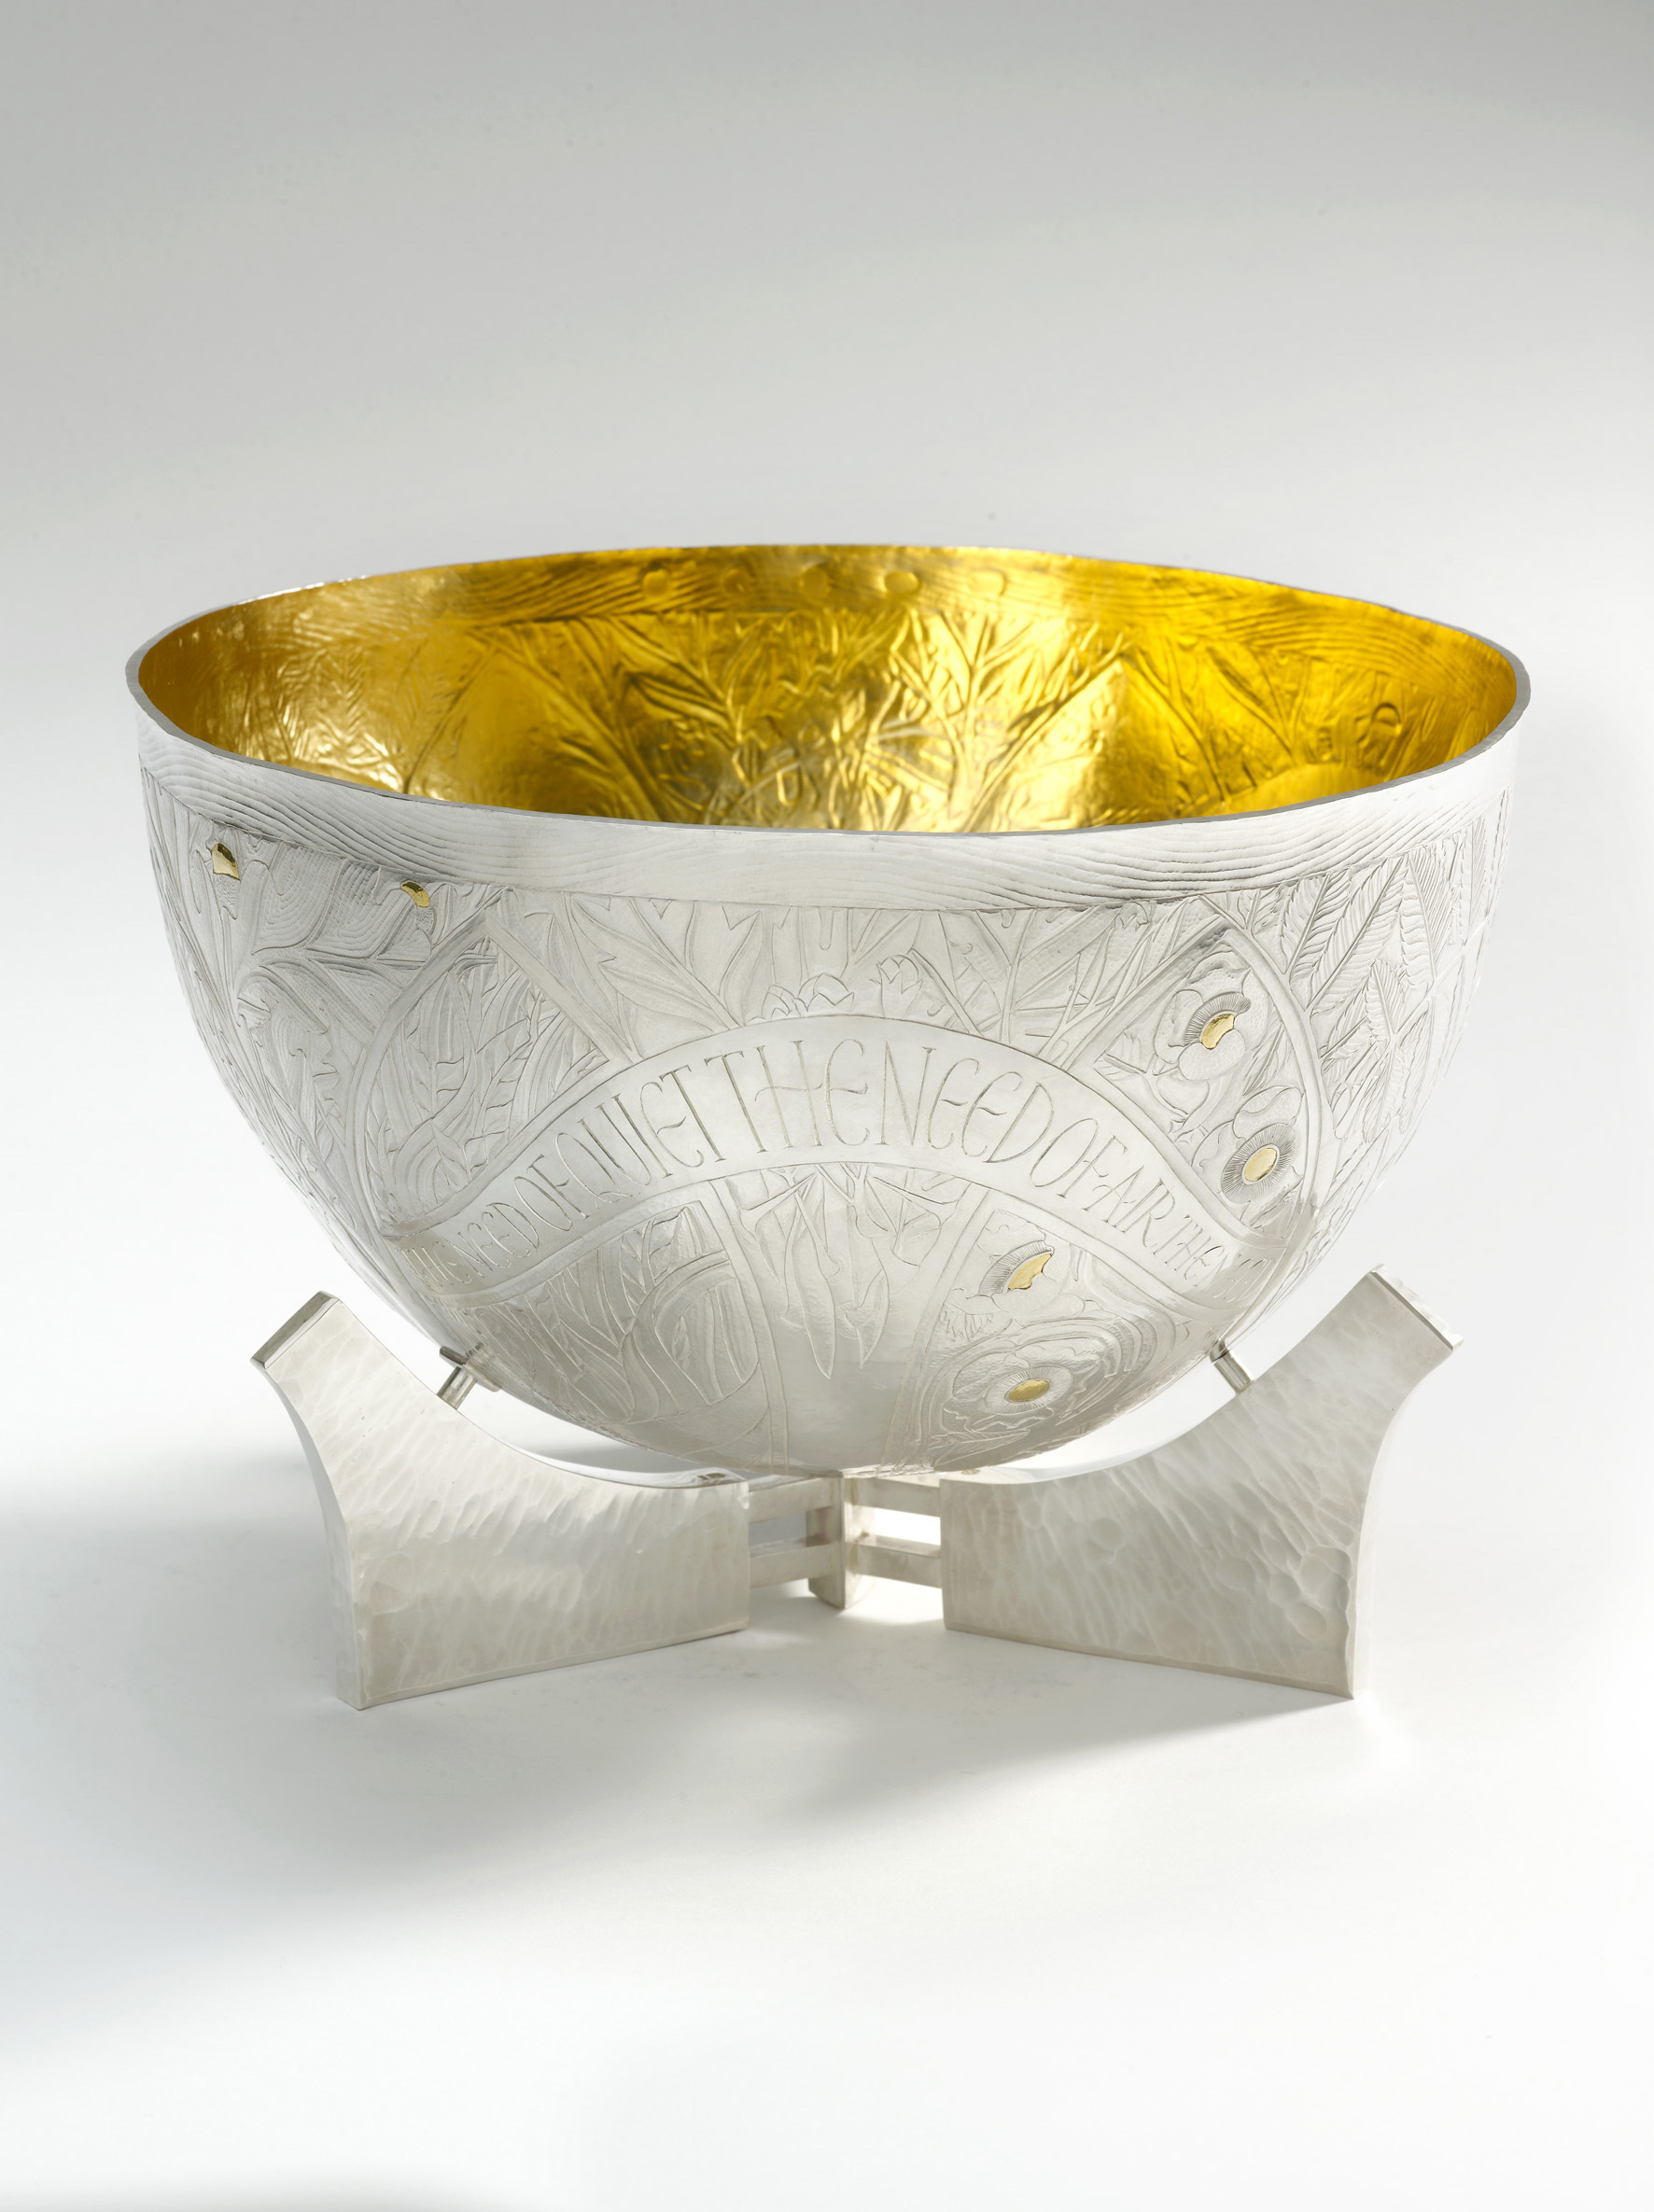 ‘Bowl’, 2009, Michael Lloyd. Measurements: Height 7cm Width 30cm. Image © The Goldsmiths’ Company. Courtesy ‘Collection: The Worshipful Company of Goldsmiths'. '